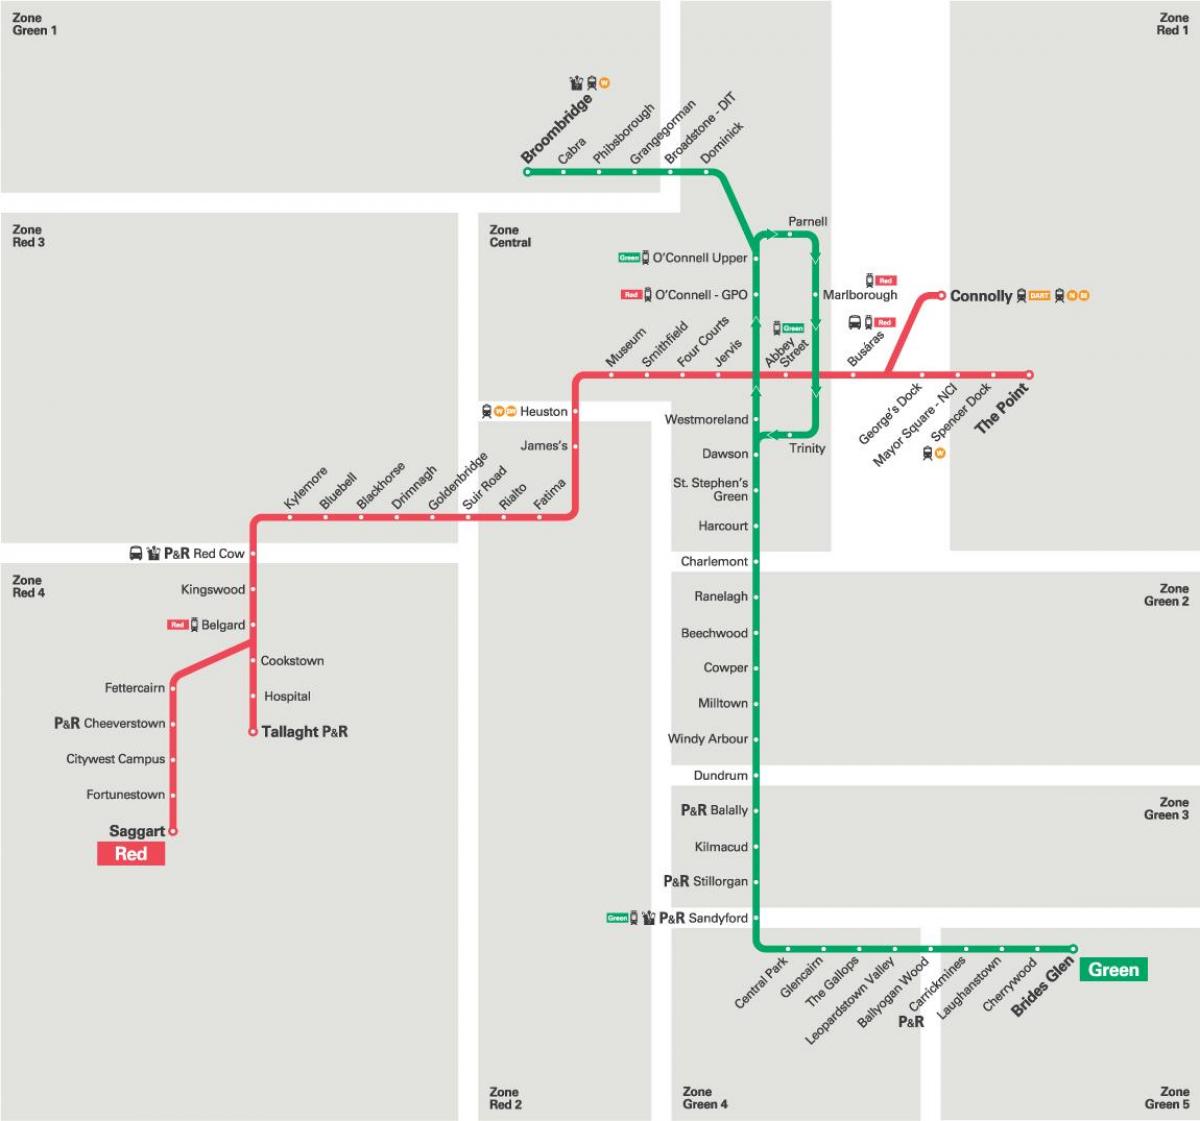 map of Luas green line